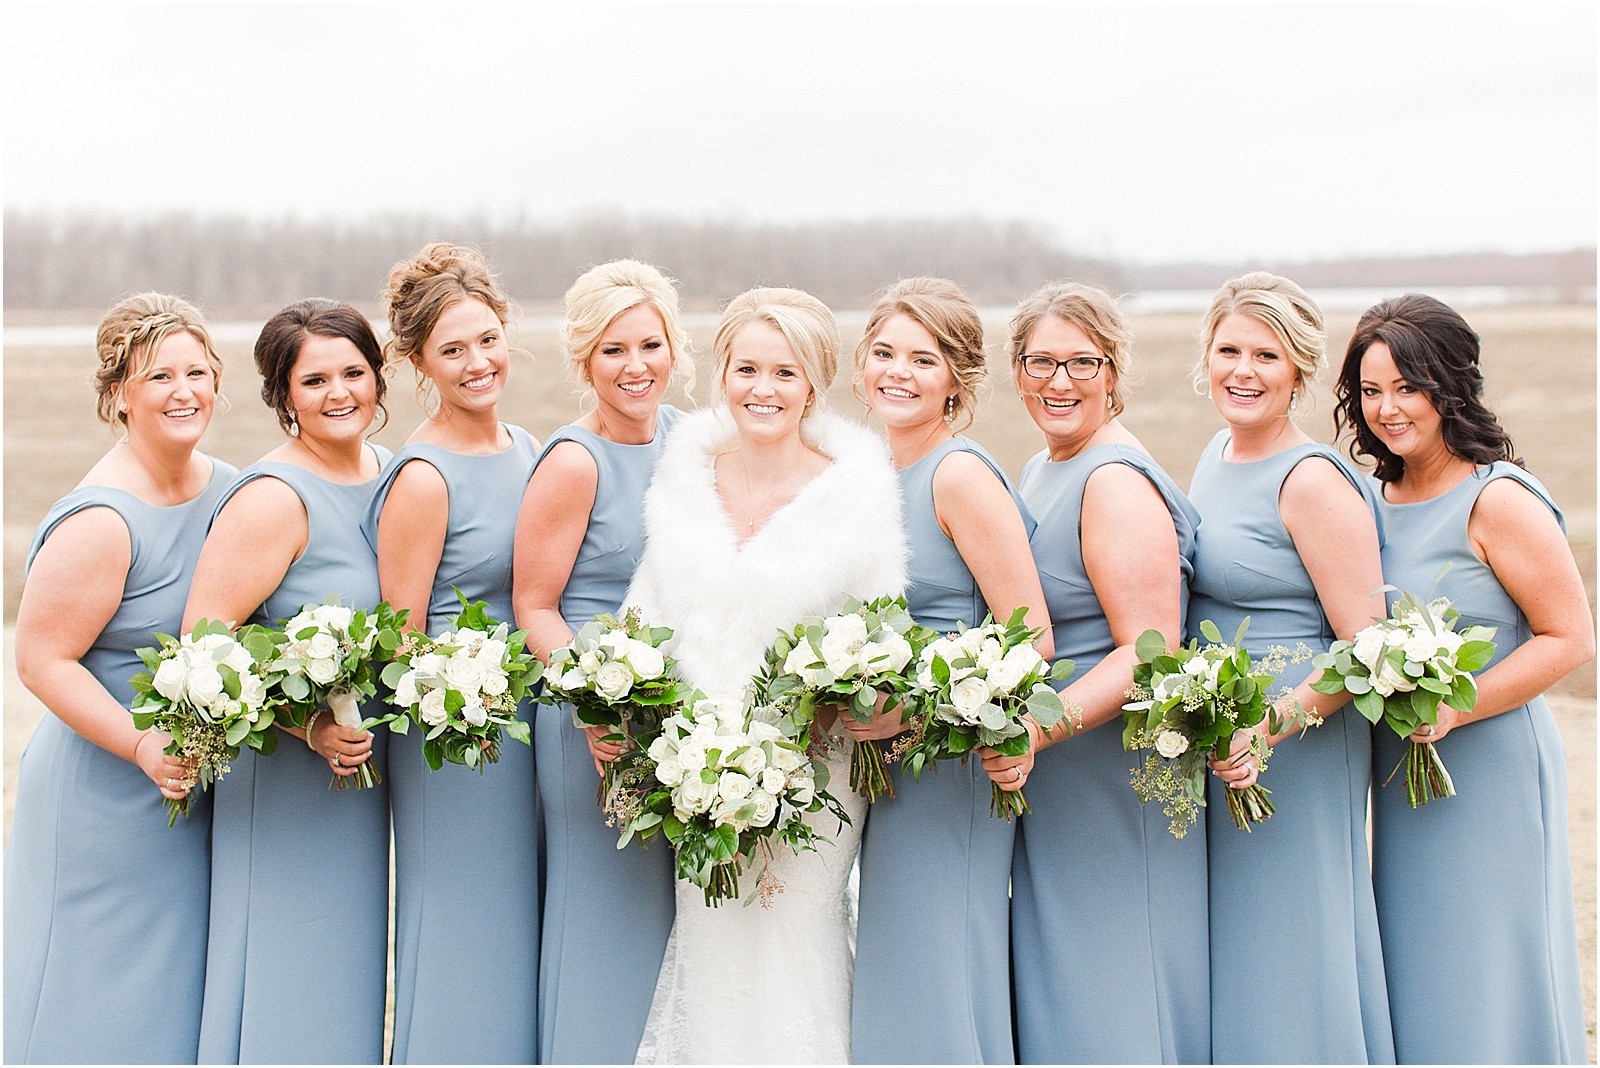 A Classic Winter Wedding in New Harmony | Rachel and Ryan | Bret and Brandie Photography 0083.jpg